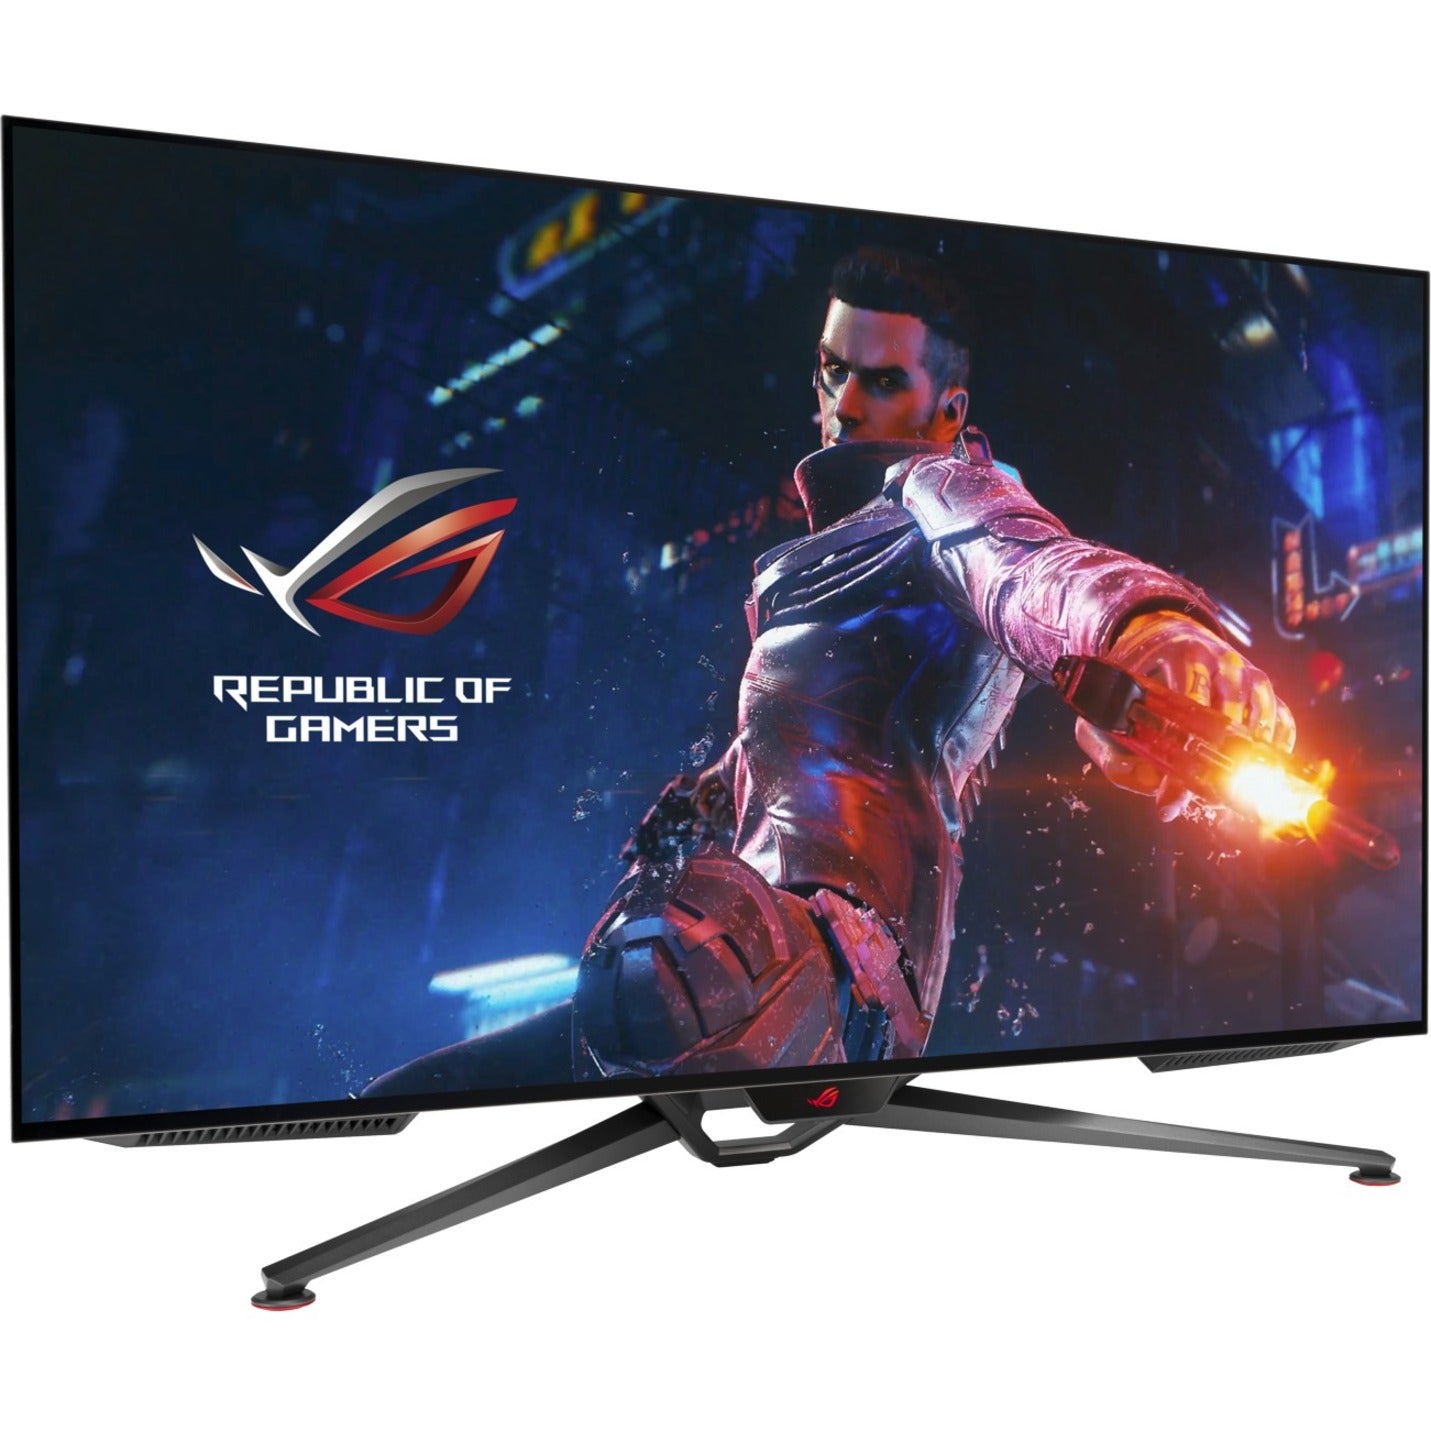 Asus ROG PG42UQ Swift 41.5" 4K UHD Gaming OLED Monitor, G-Sync Compatible, 138Hz Refresh Rate